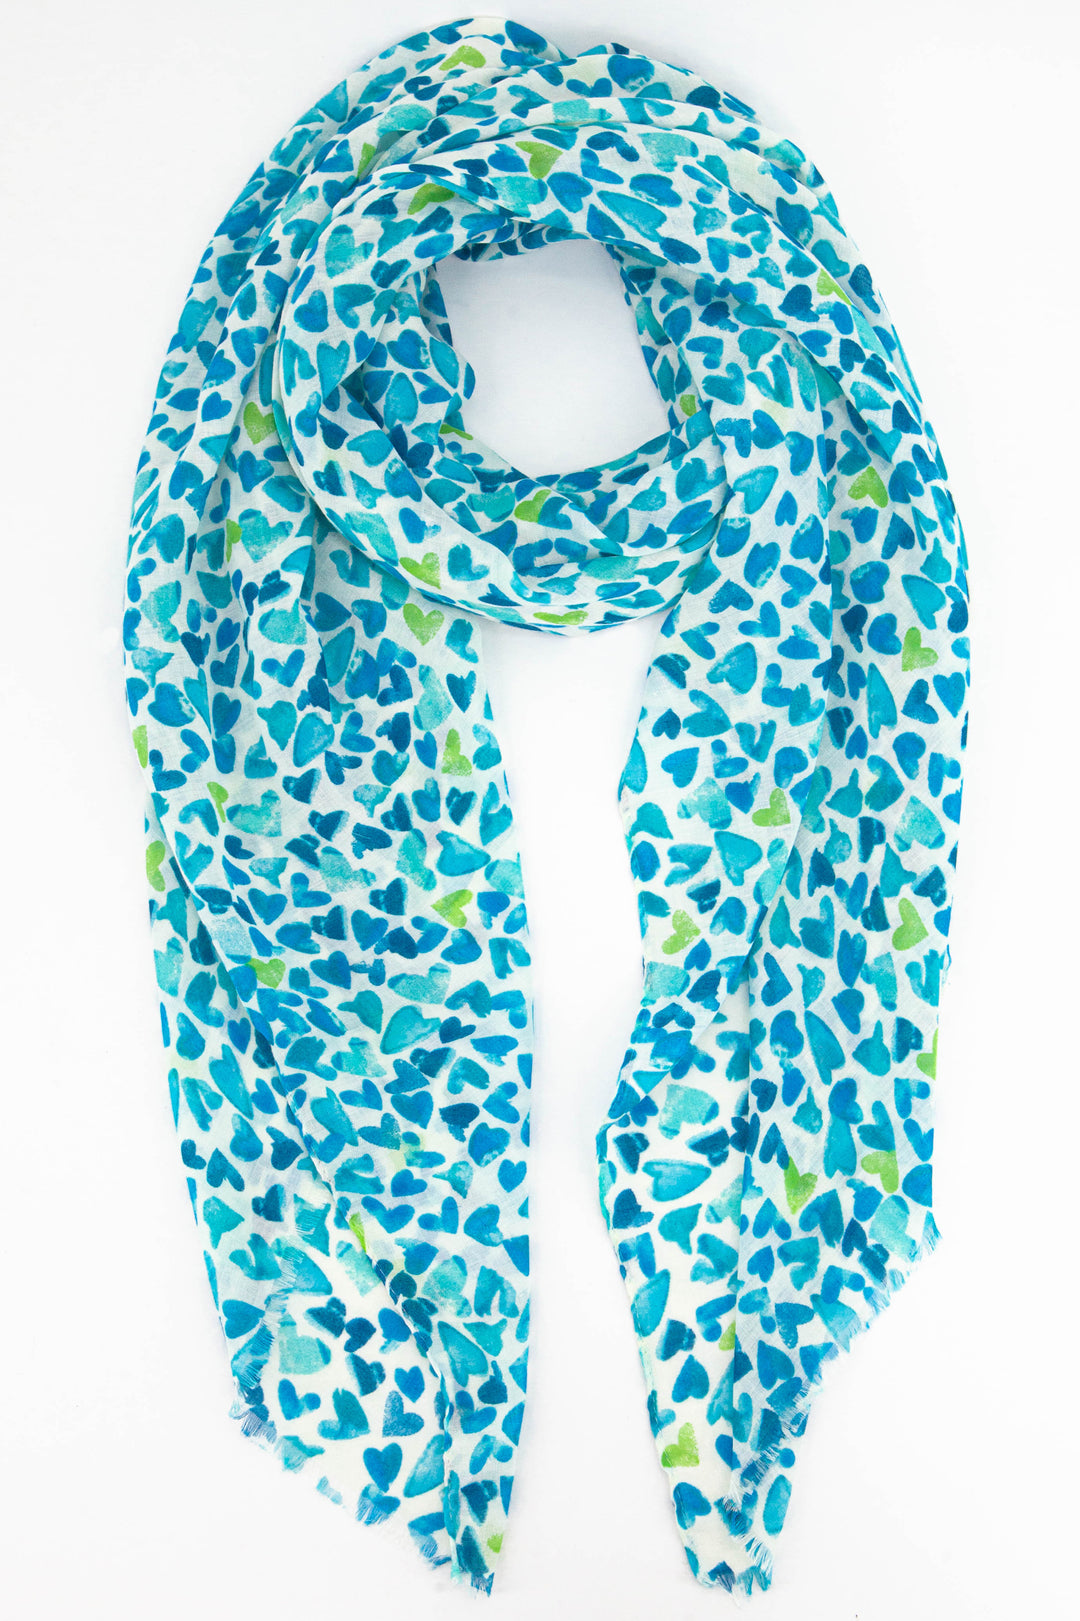 lightweight summer scarf with an all over pattern of blue and green love hearts which look like they have been hand sketched